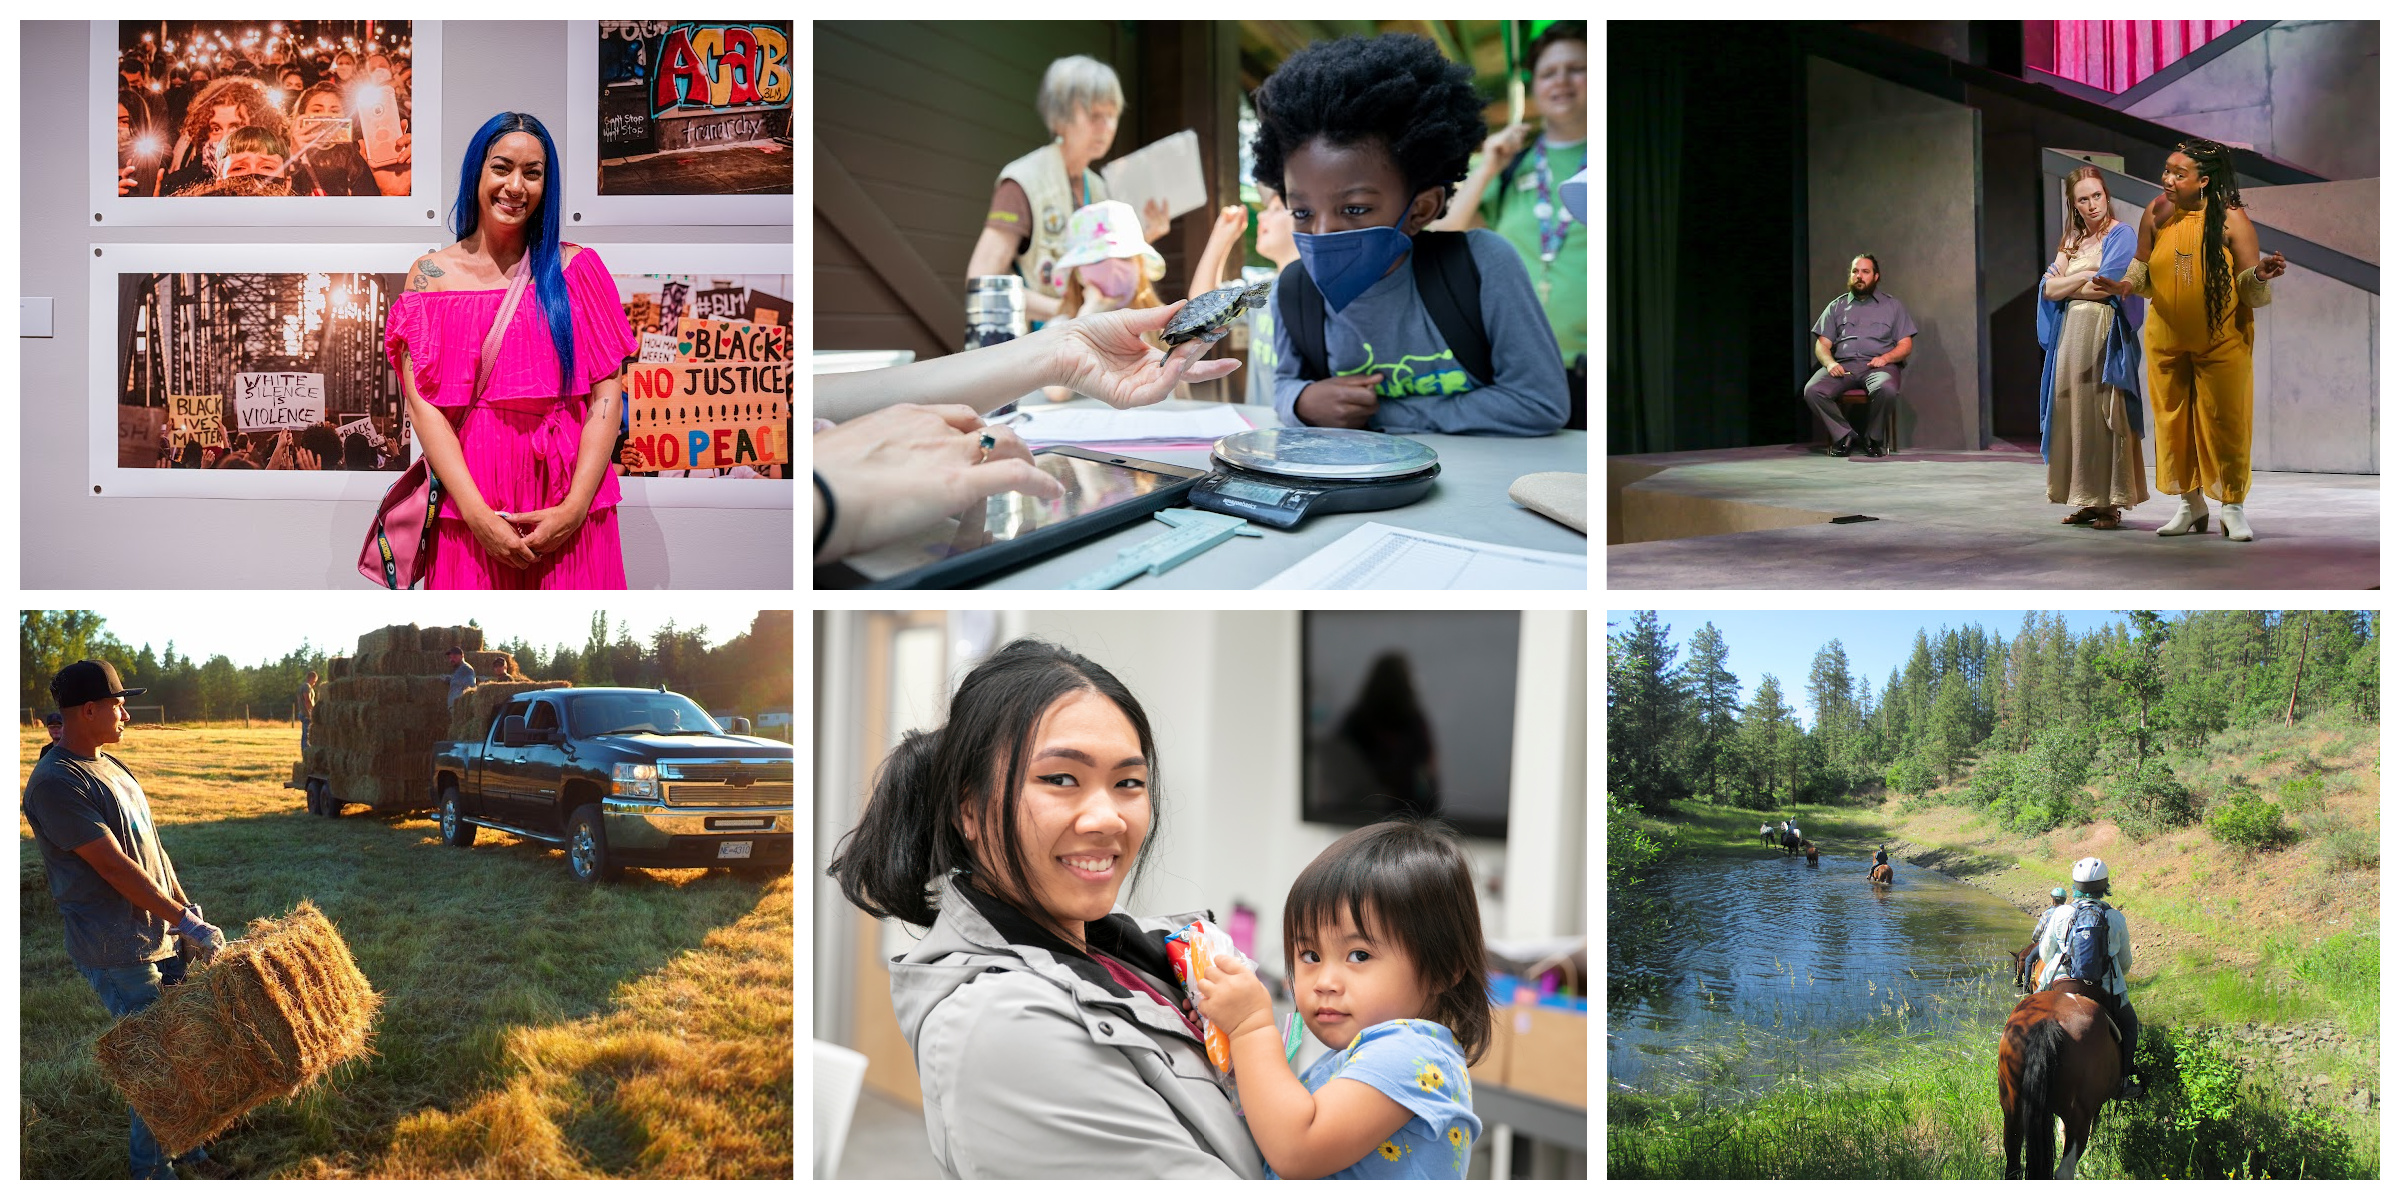 A collage of photos from nonprofits that received grants from the Murdock Trust in Fall 2022; photos include a woman standing in front of art, a young child learning science, two girls acting on stage, a man loading a bale of hay onto a truck, a mom and her daughter, and a person riding a horse outside.